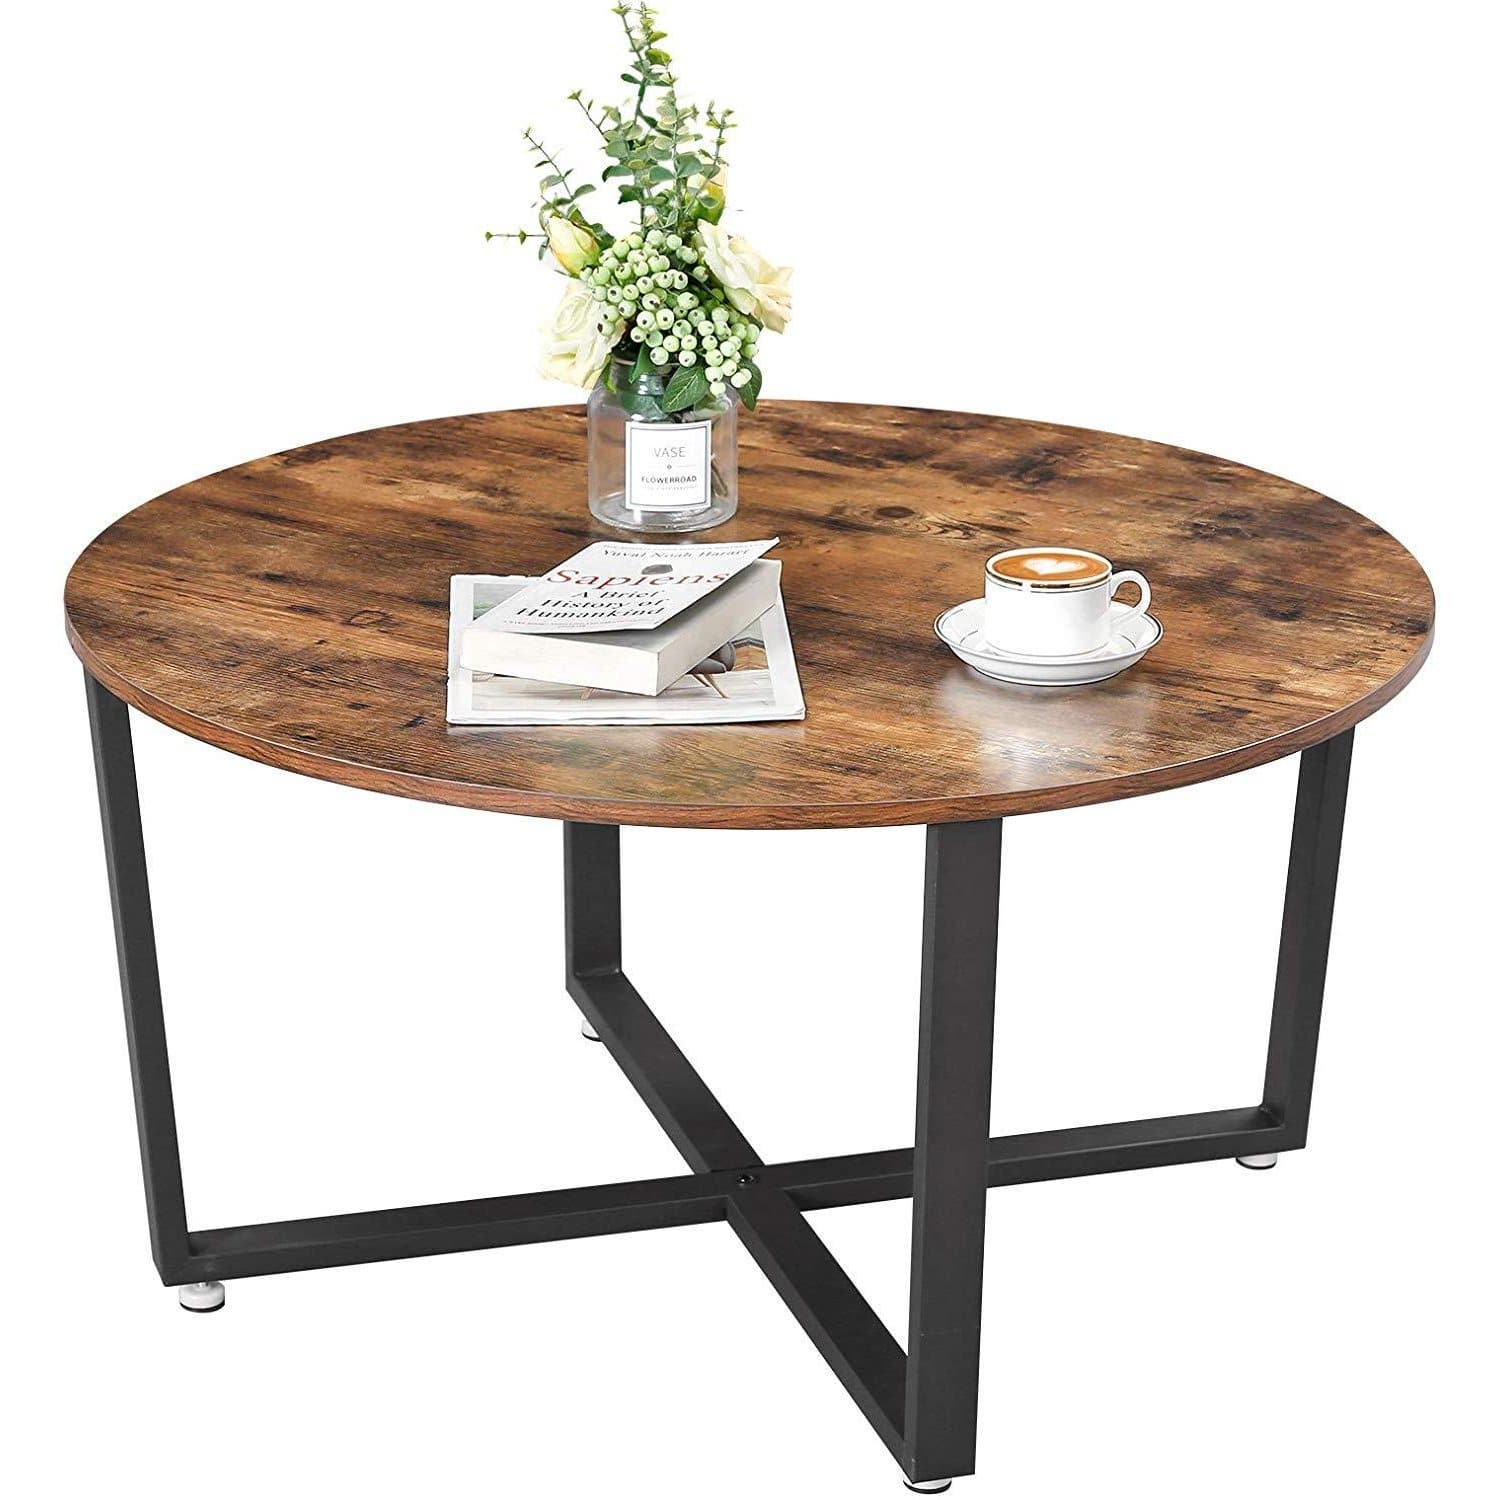 Nancy's Round Coffee Table - Industrial Style - Side Table - Cocktail Table - 88 x 88 x 47 cm